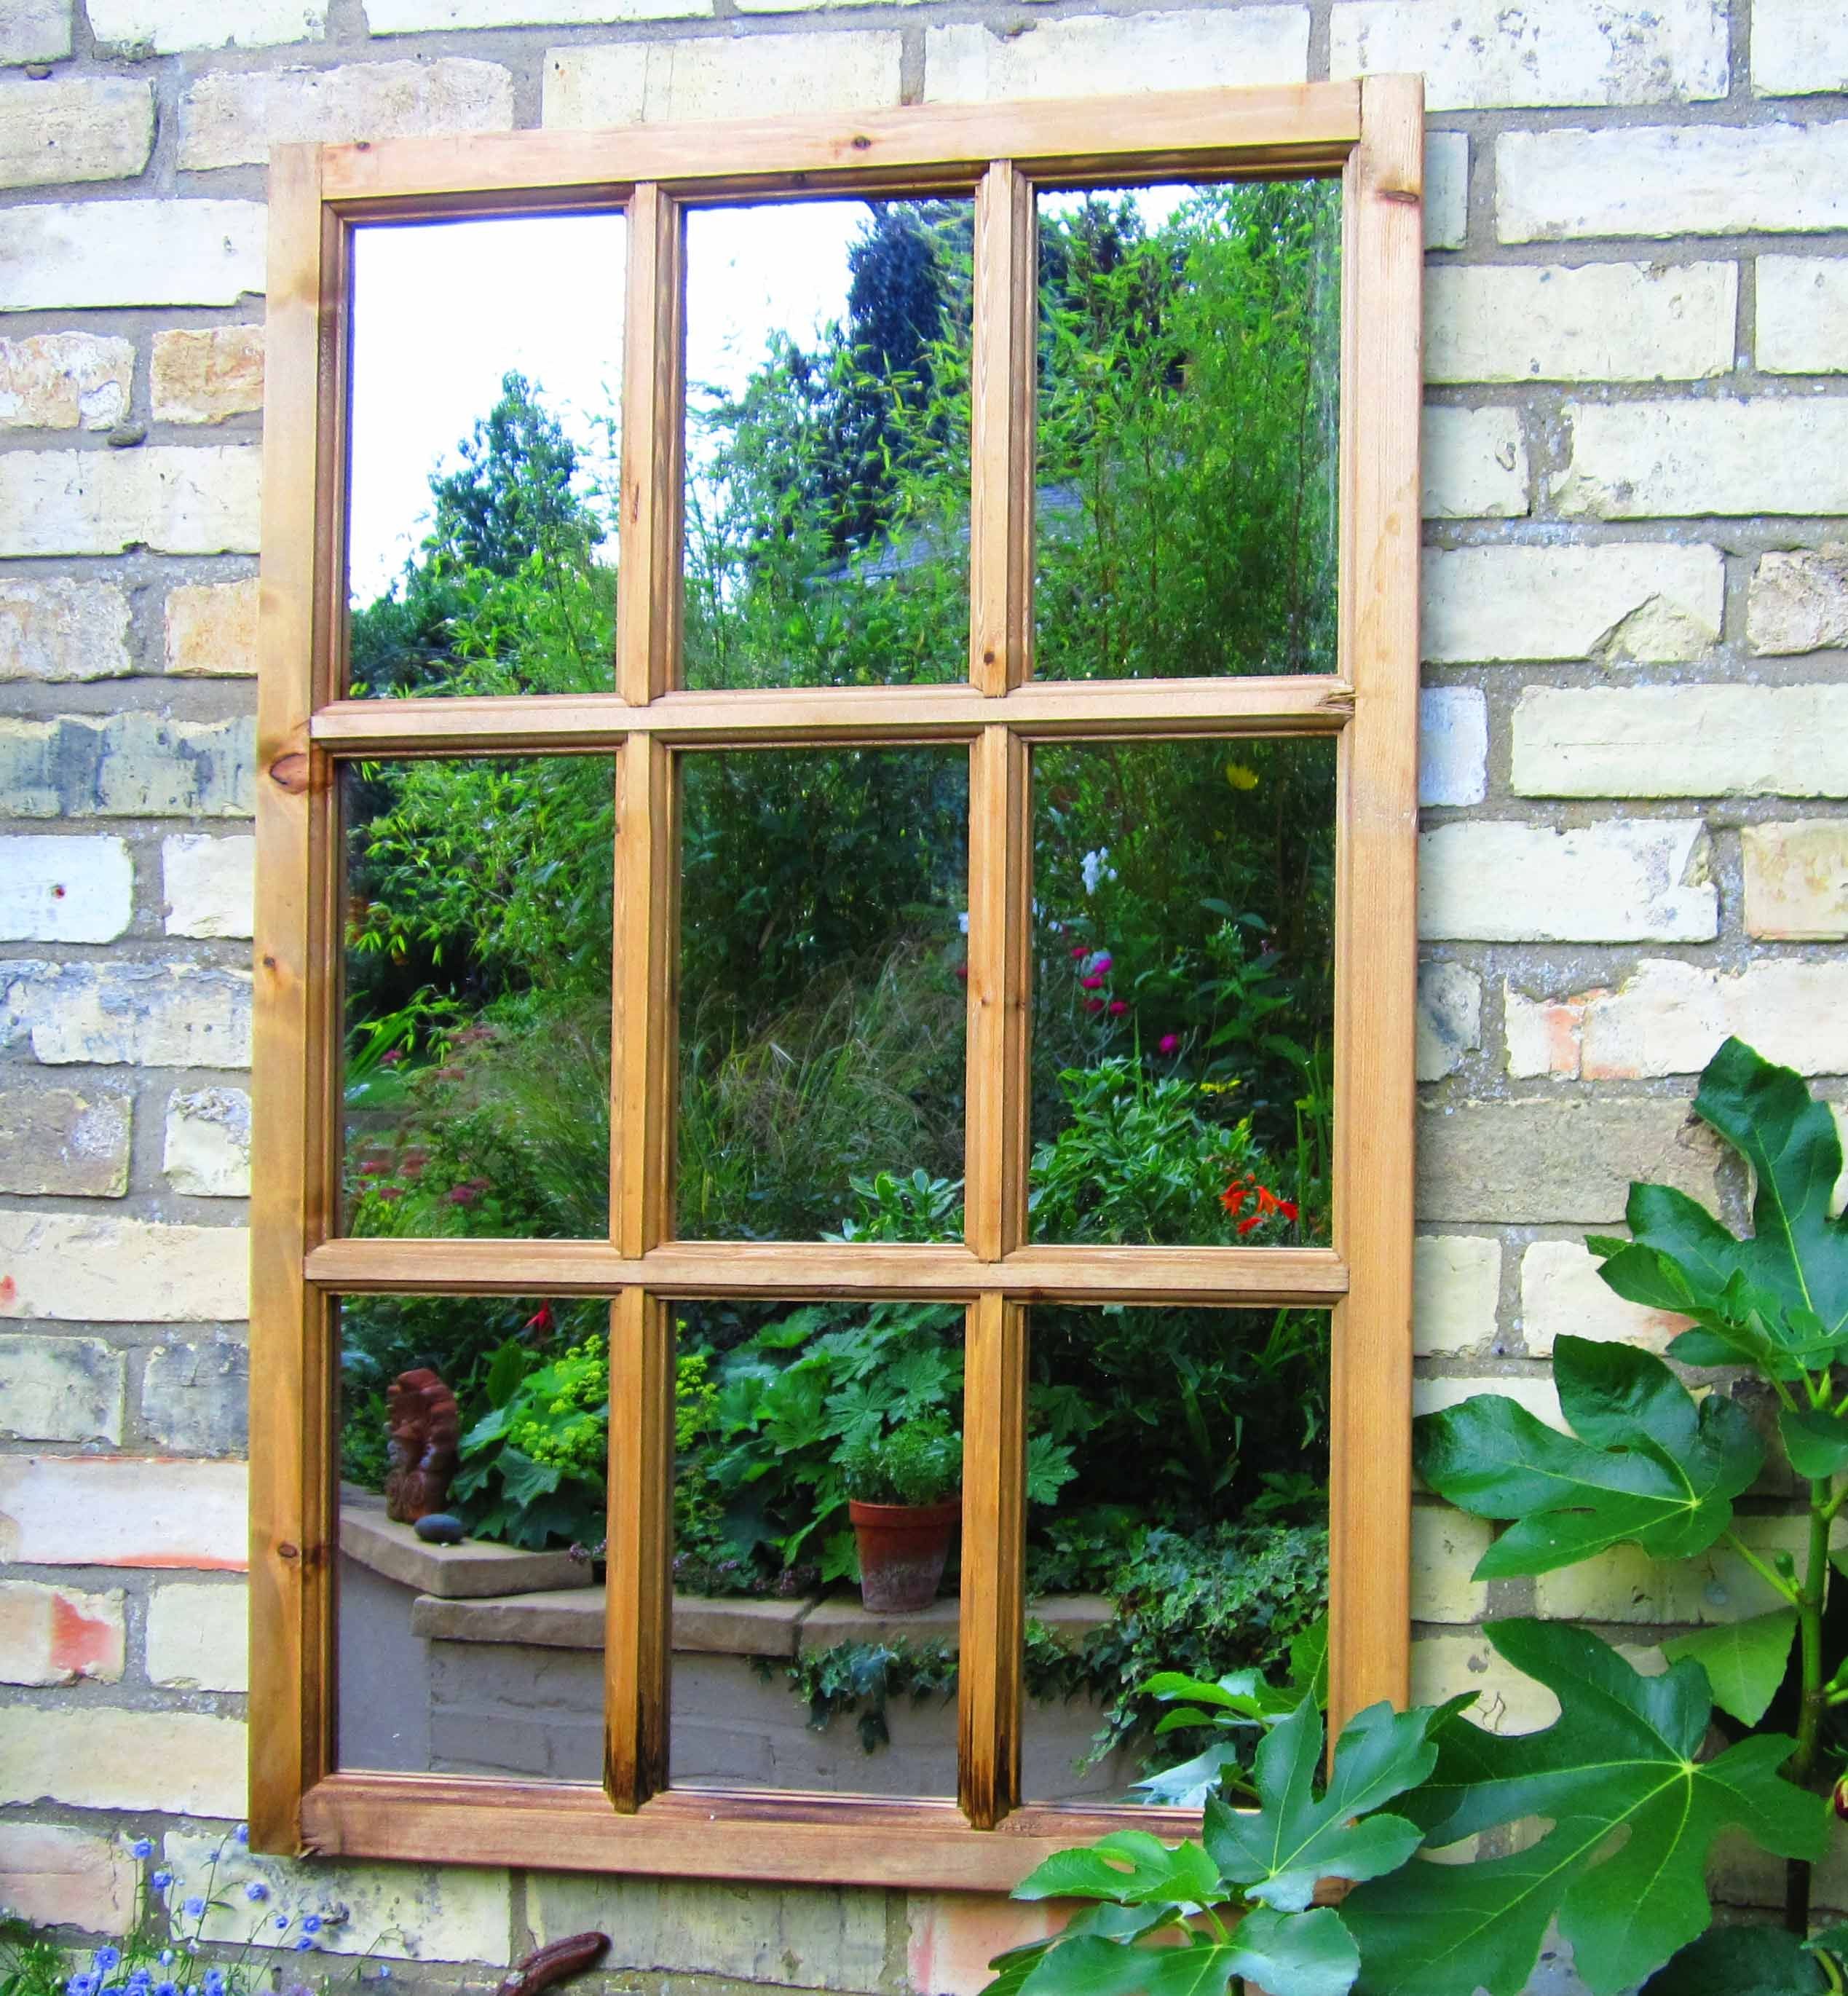 Parallax Illusion Victorian Window Outdoor Garden Mirror Gardens Throughout Garden Window Mirror (View 7 of 15)